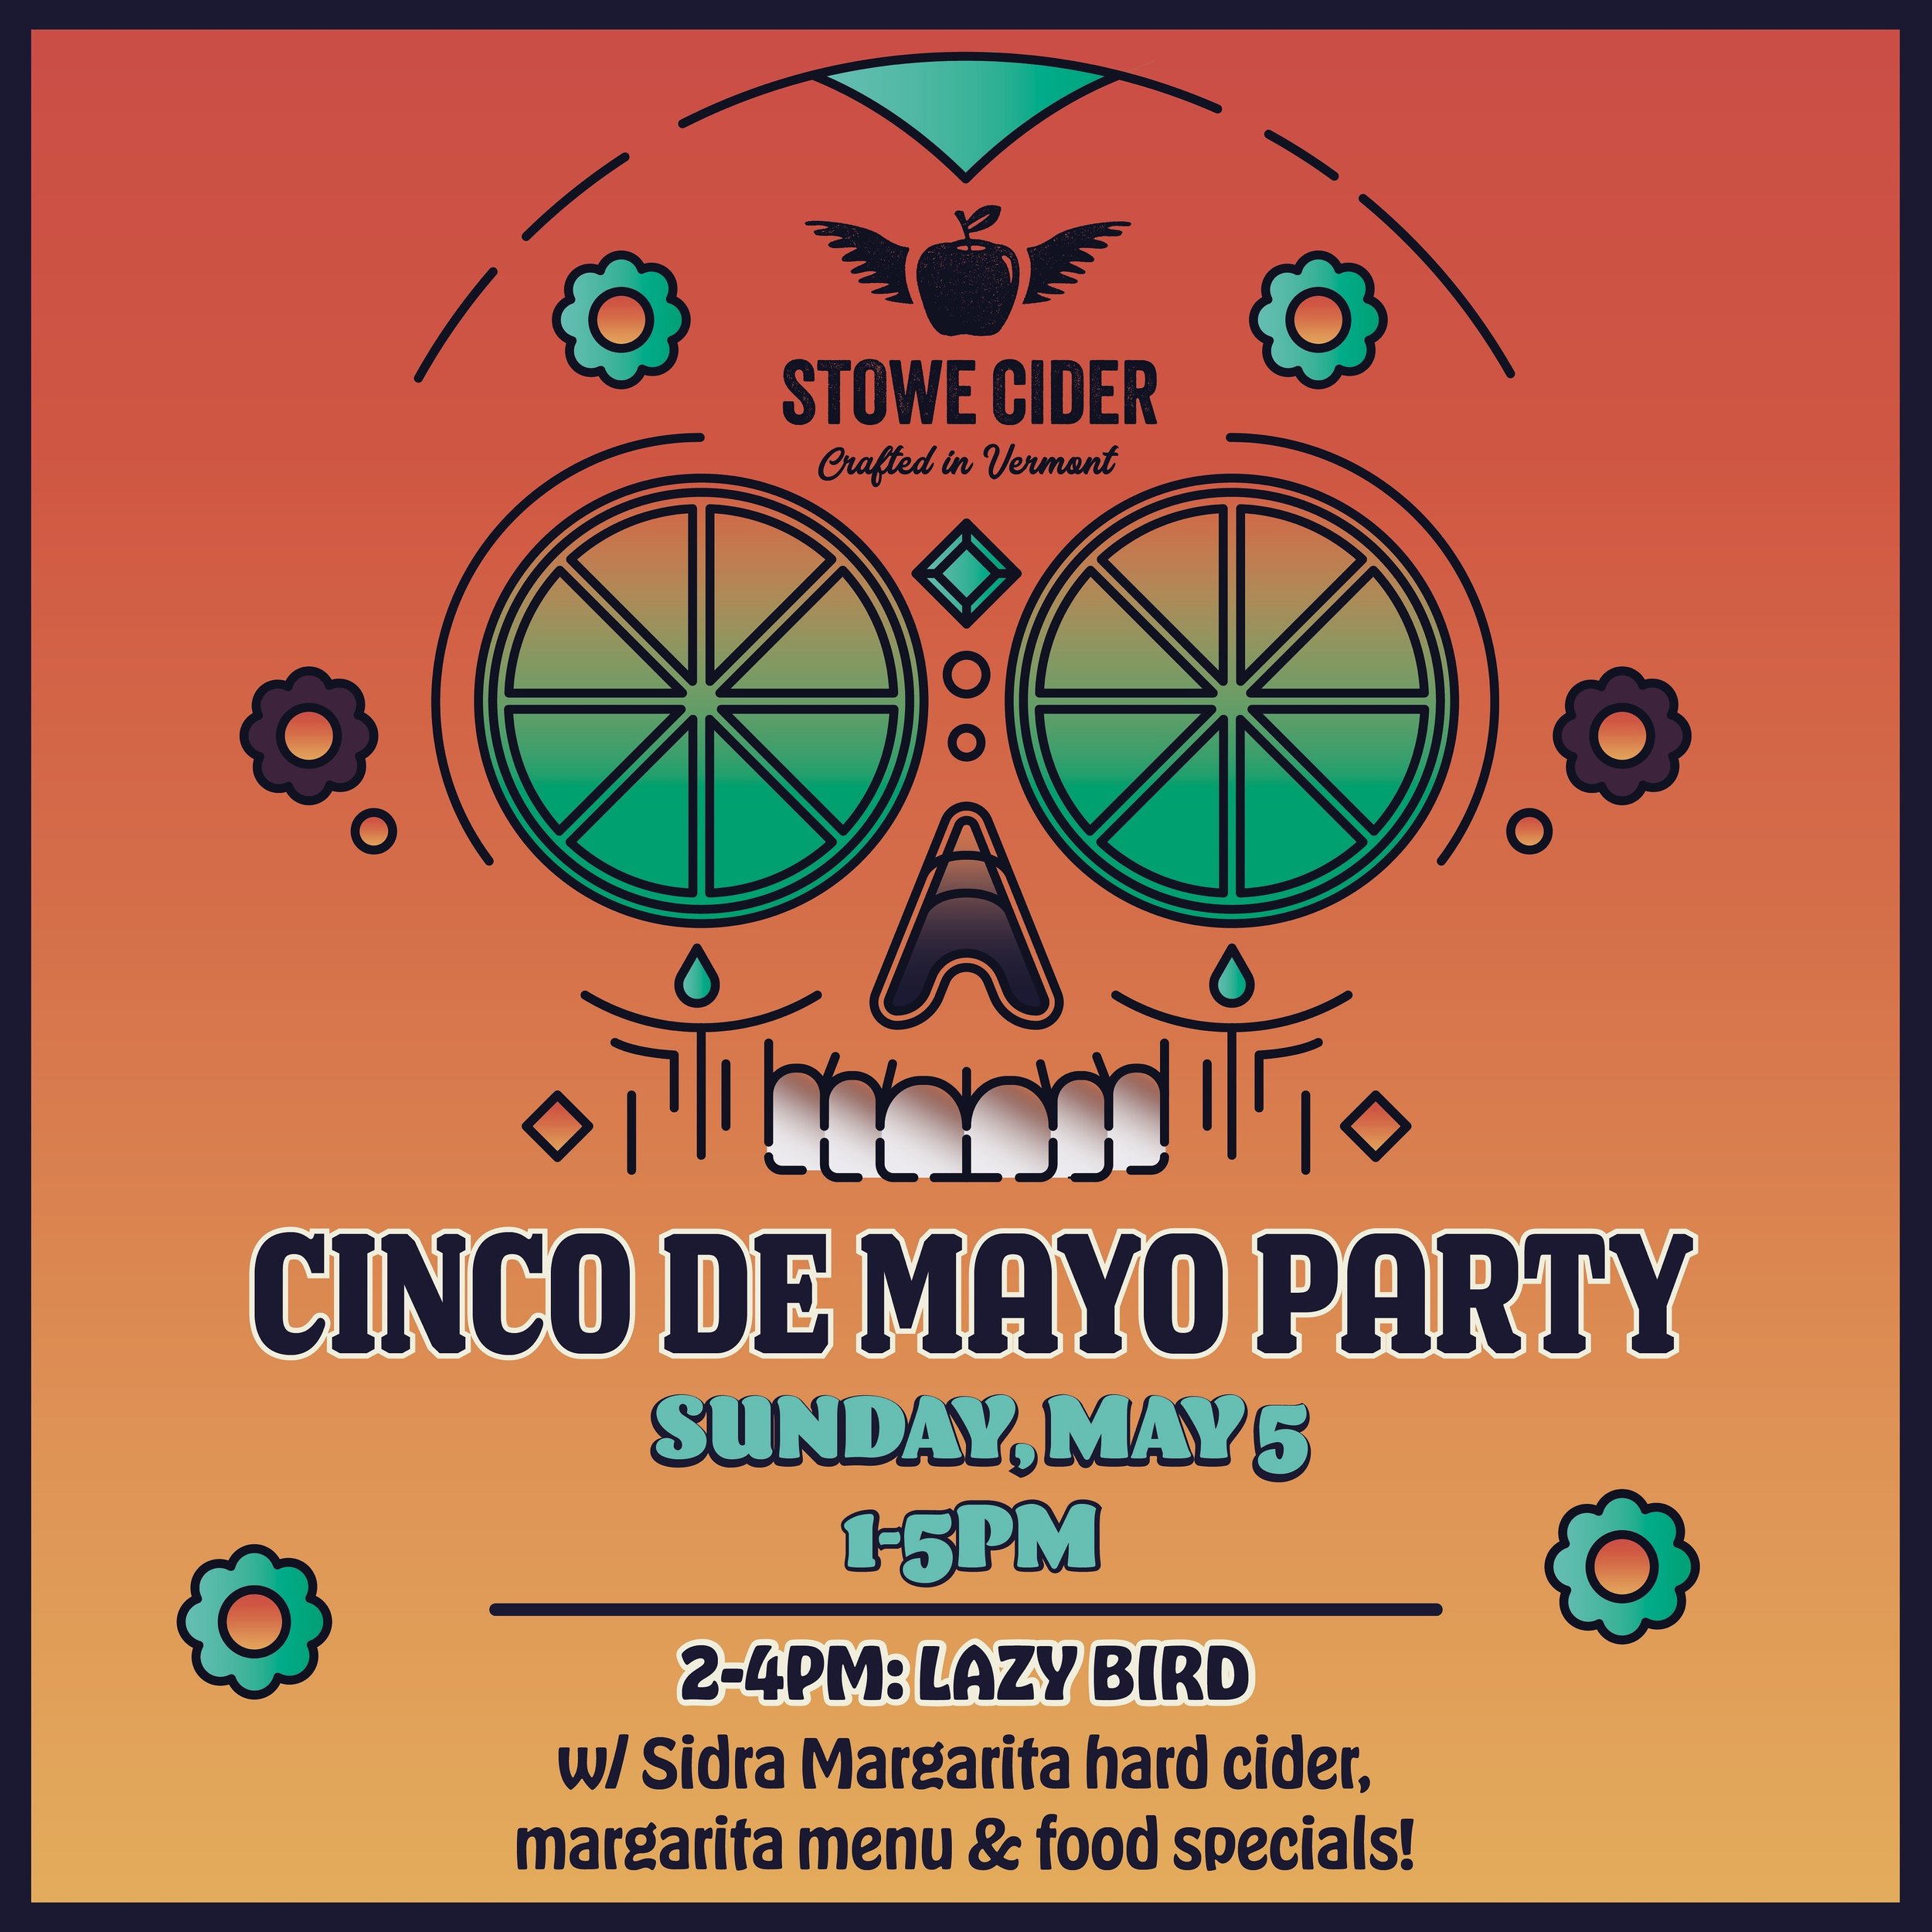 We&rsquo;re back open and ready to party! Join us this weekend for a Cinco de Mayo celebration featuring live music from @lazybirdband! We will have a limited release of Sidra Margarita cider (draft-only), a delicious margarita menu, food specials &a